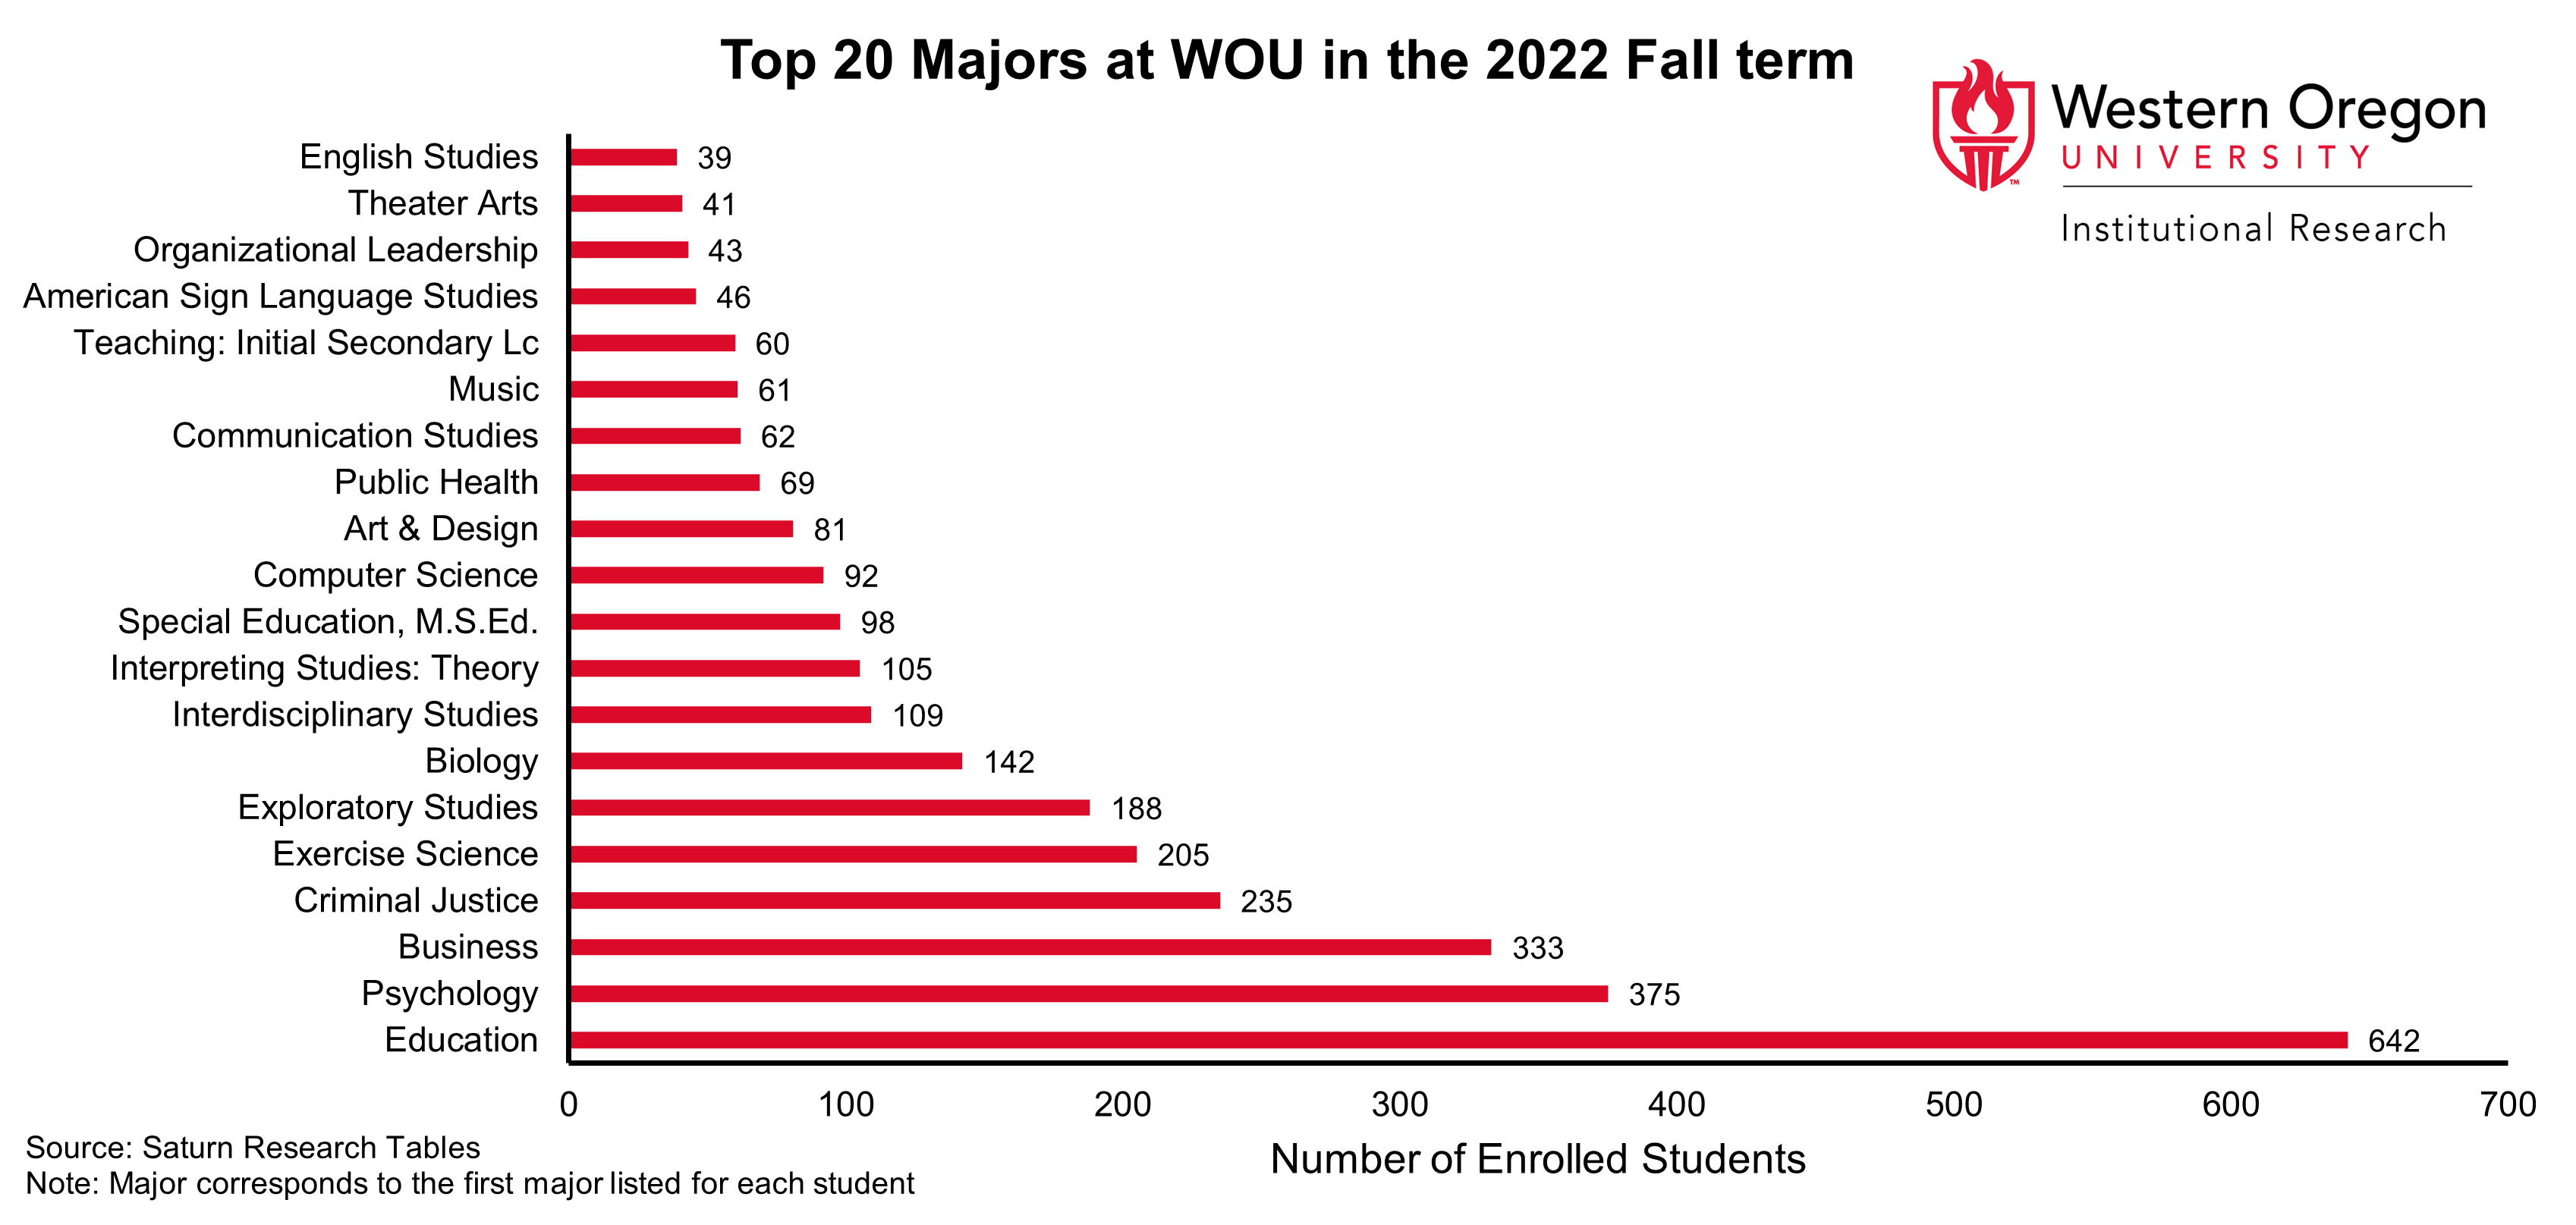 Bar graph of the top 20 majors at WOU in Fall 2022, showing that Education, Psychology and Business are the majors with the largest number of students enrolled